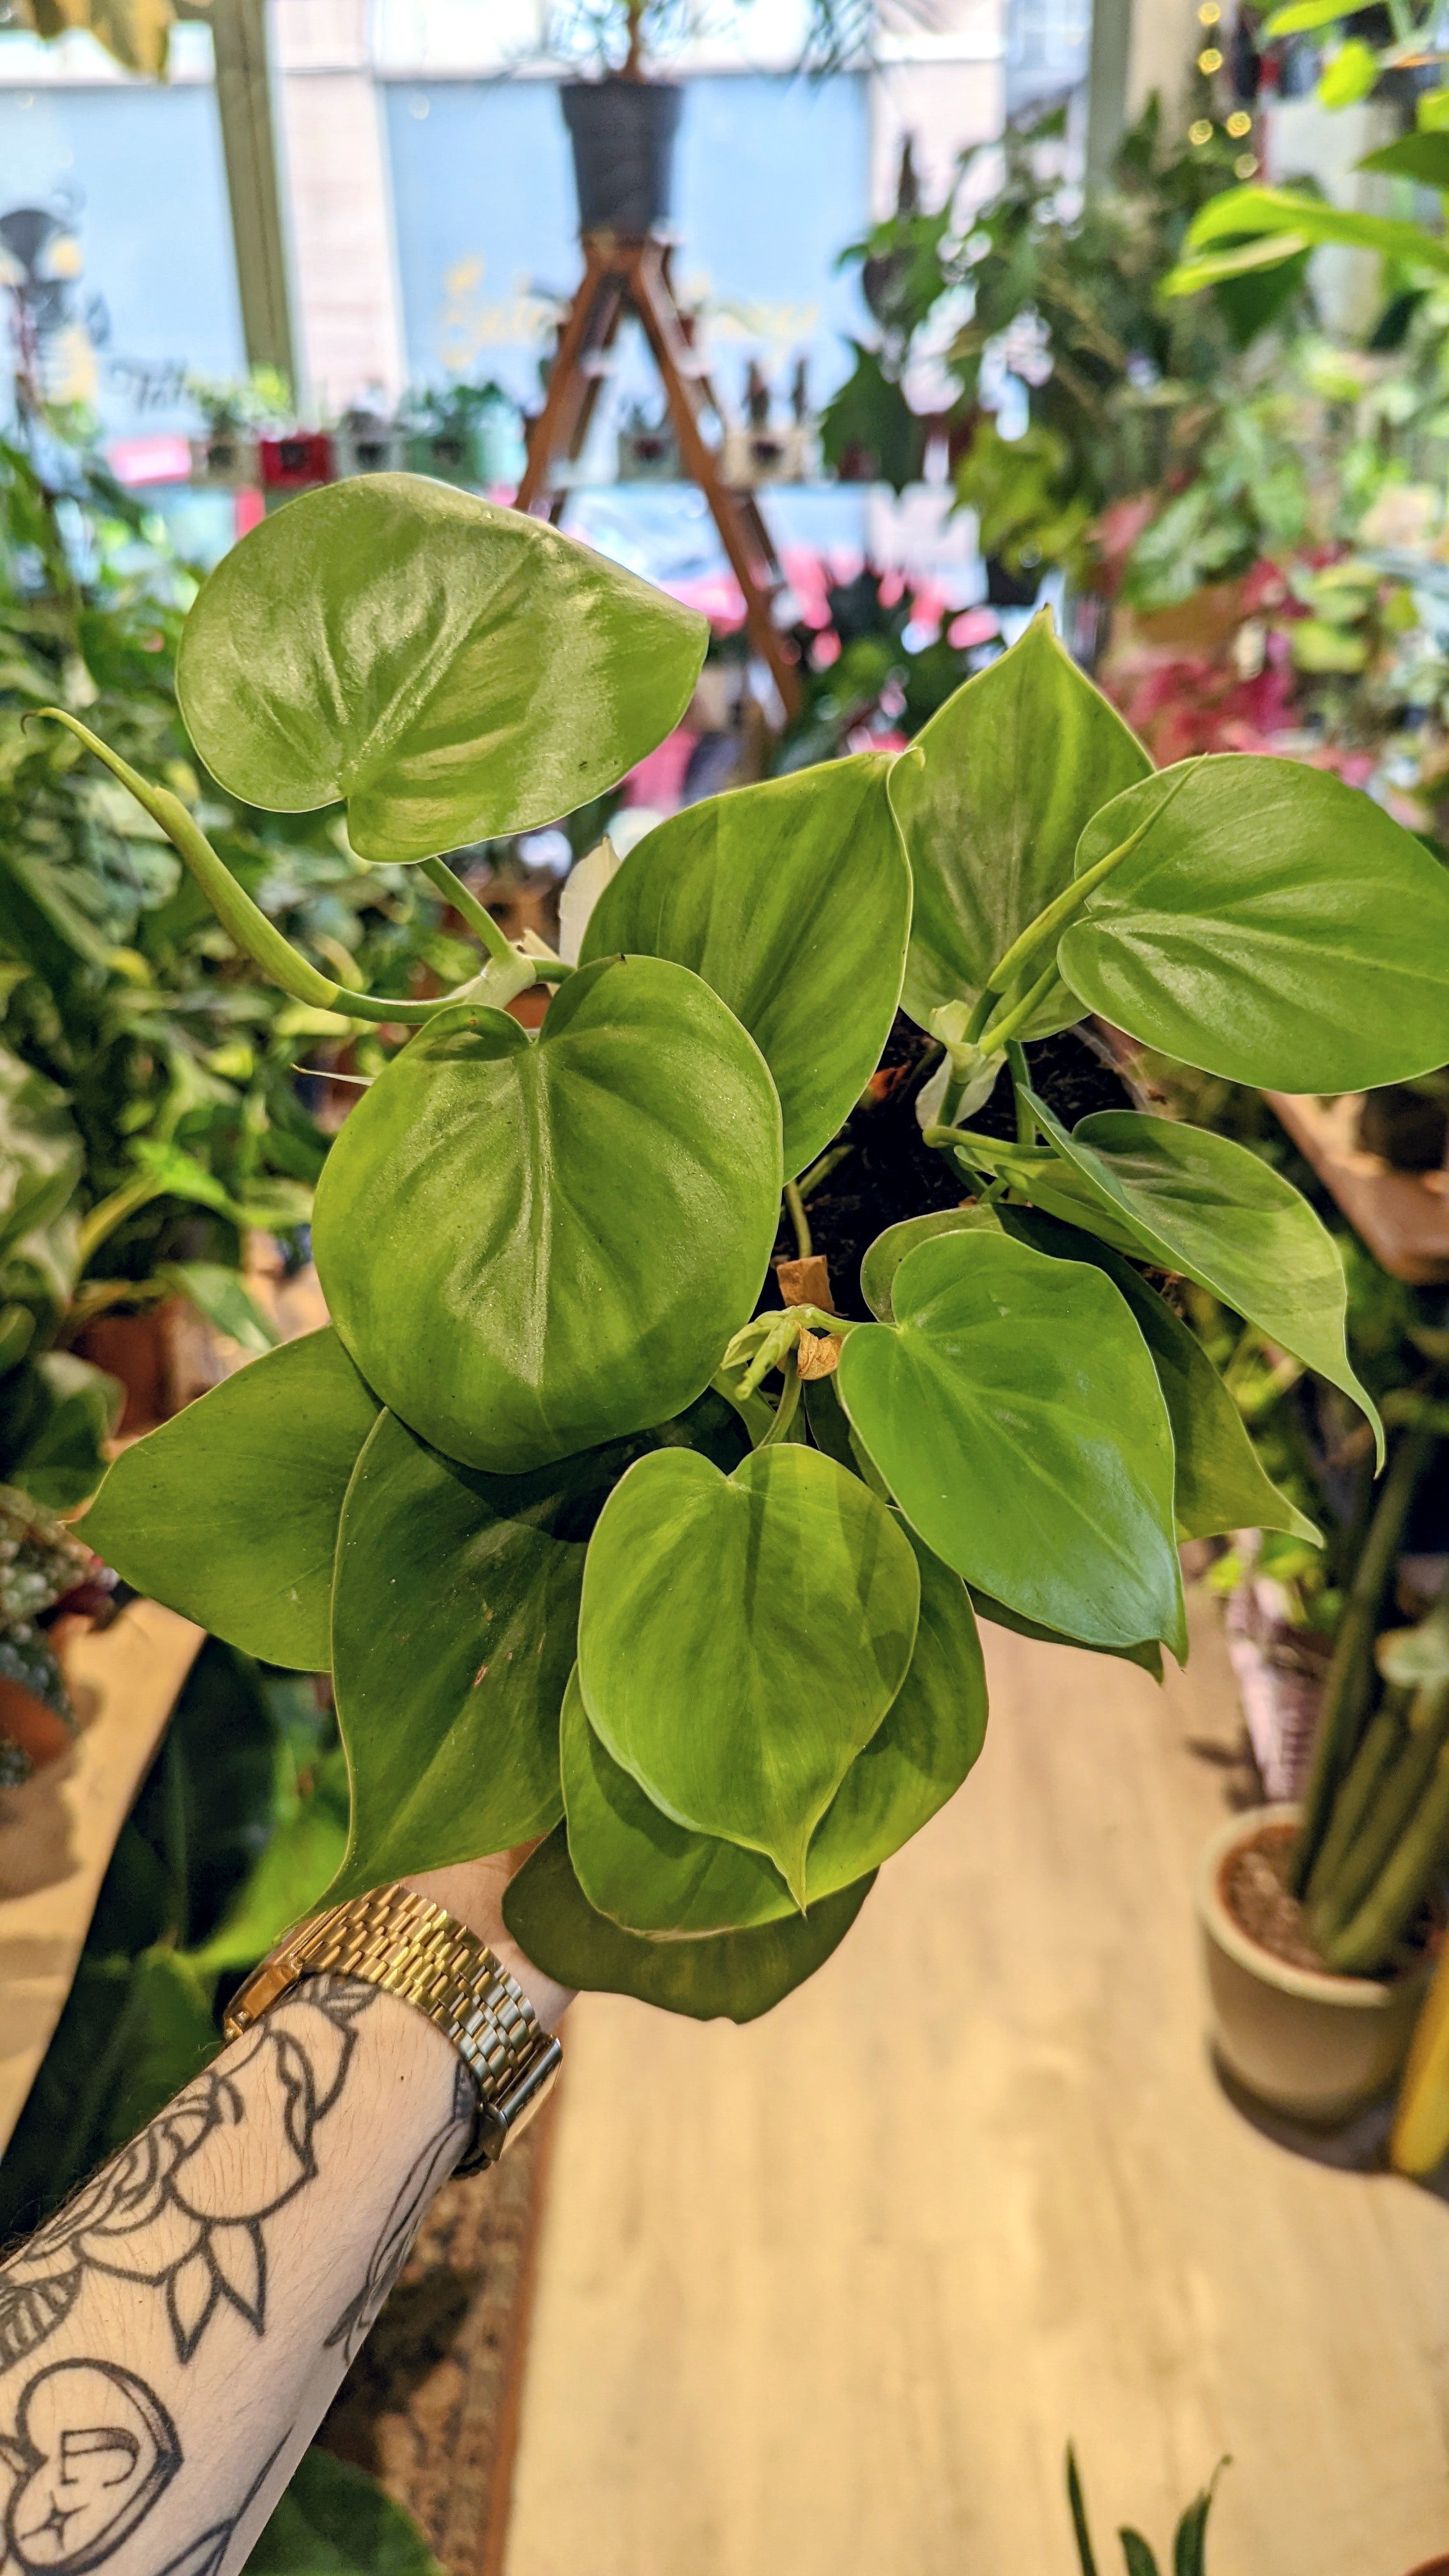 Philodendron Scandens (Plusieurs options)